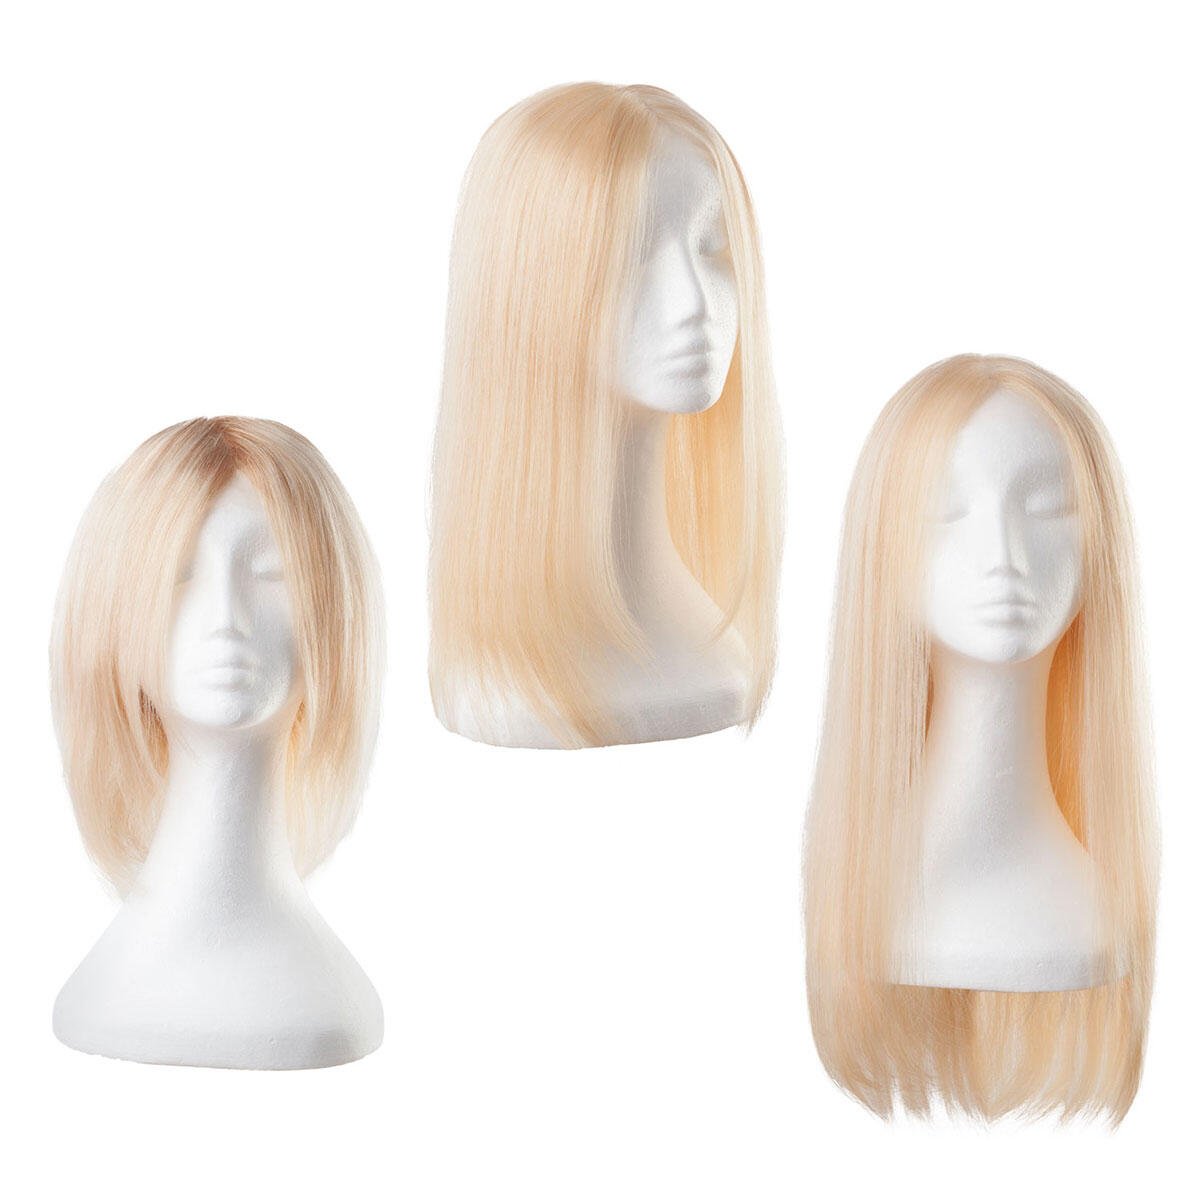 Lace Wig Human Hair 10.6 Blonde 45 cm